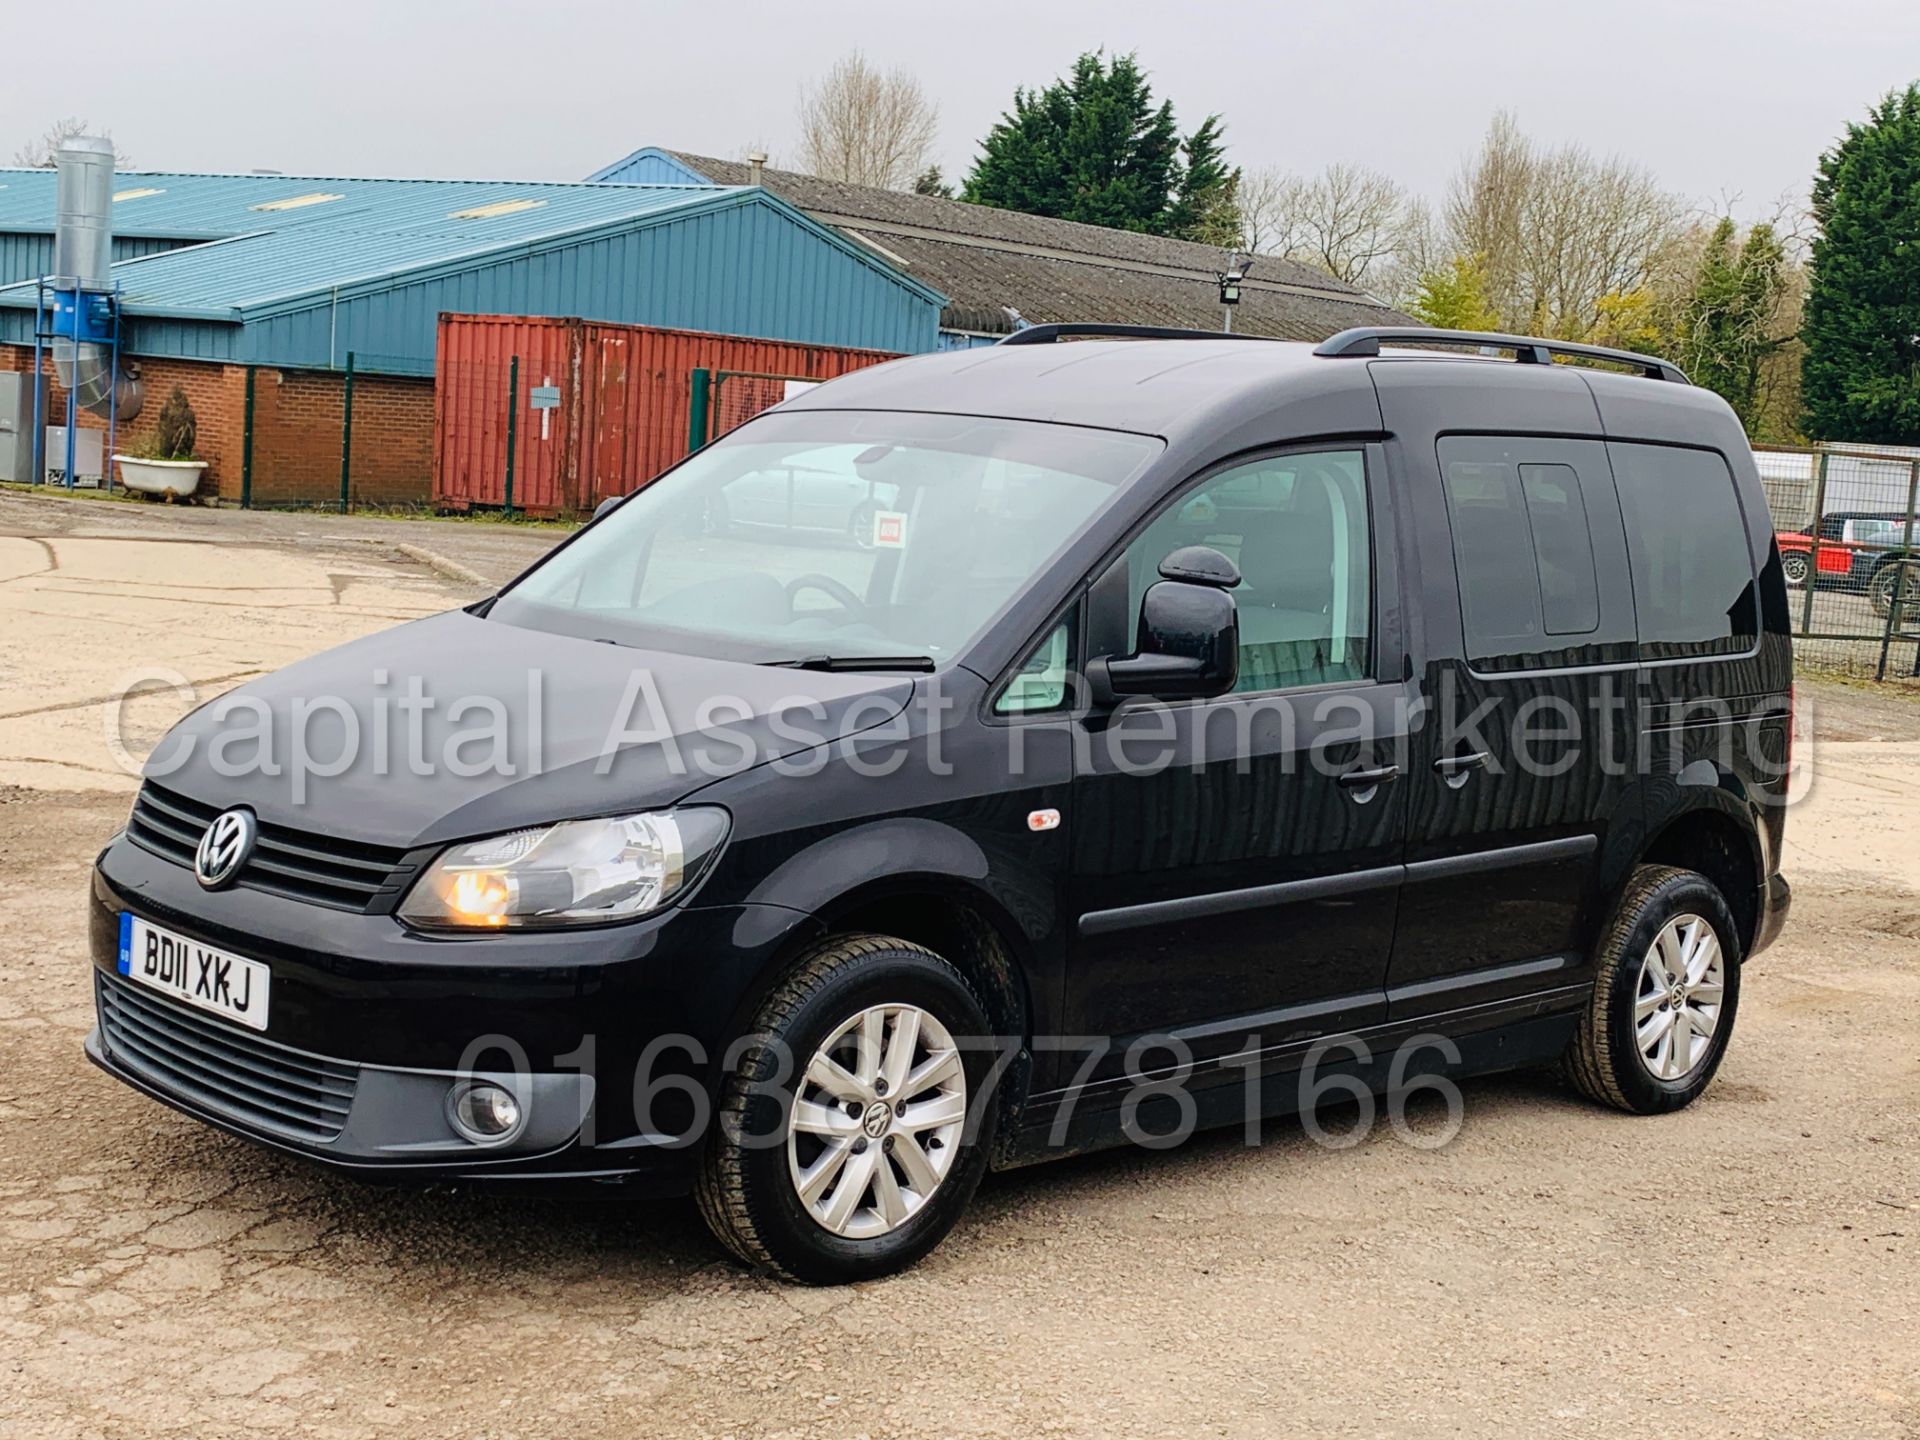 VOLKSWAGEN CADDY C20 *LIFE* DISABILITY ACCESS /WAV (2011) '1.6 TDI - AUTO' *A/C* (35,000 MILES ONLY)